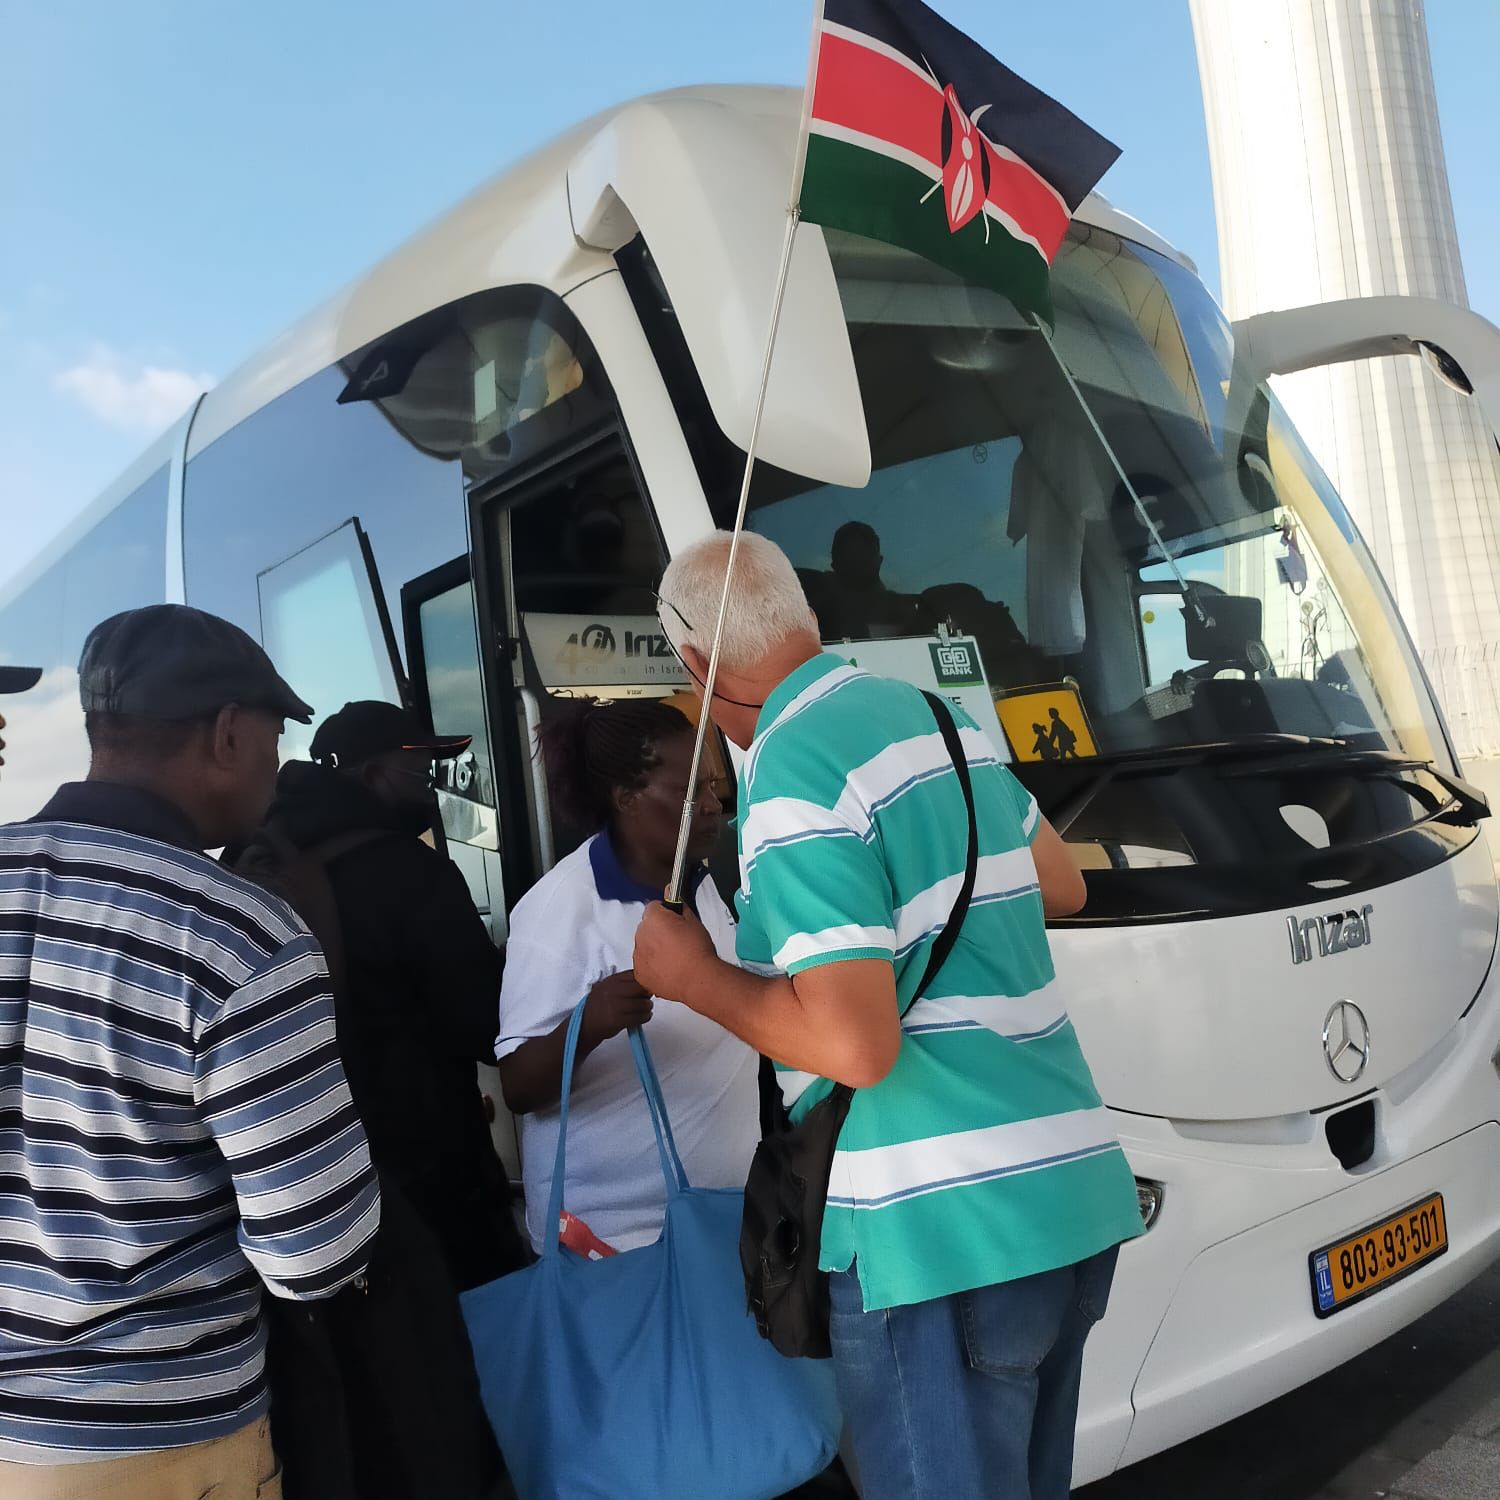 King David, a tour guide in Israel, assisting one of the MSME customers to board a bus upon arrival in Israel